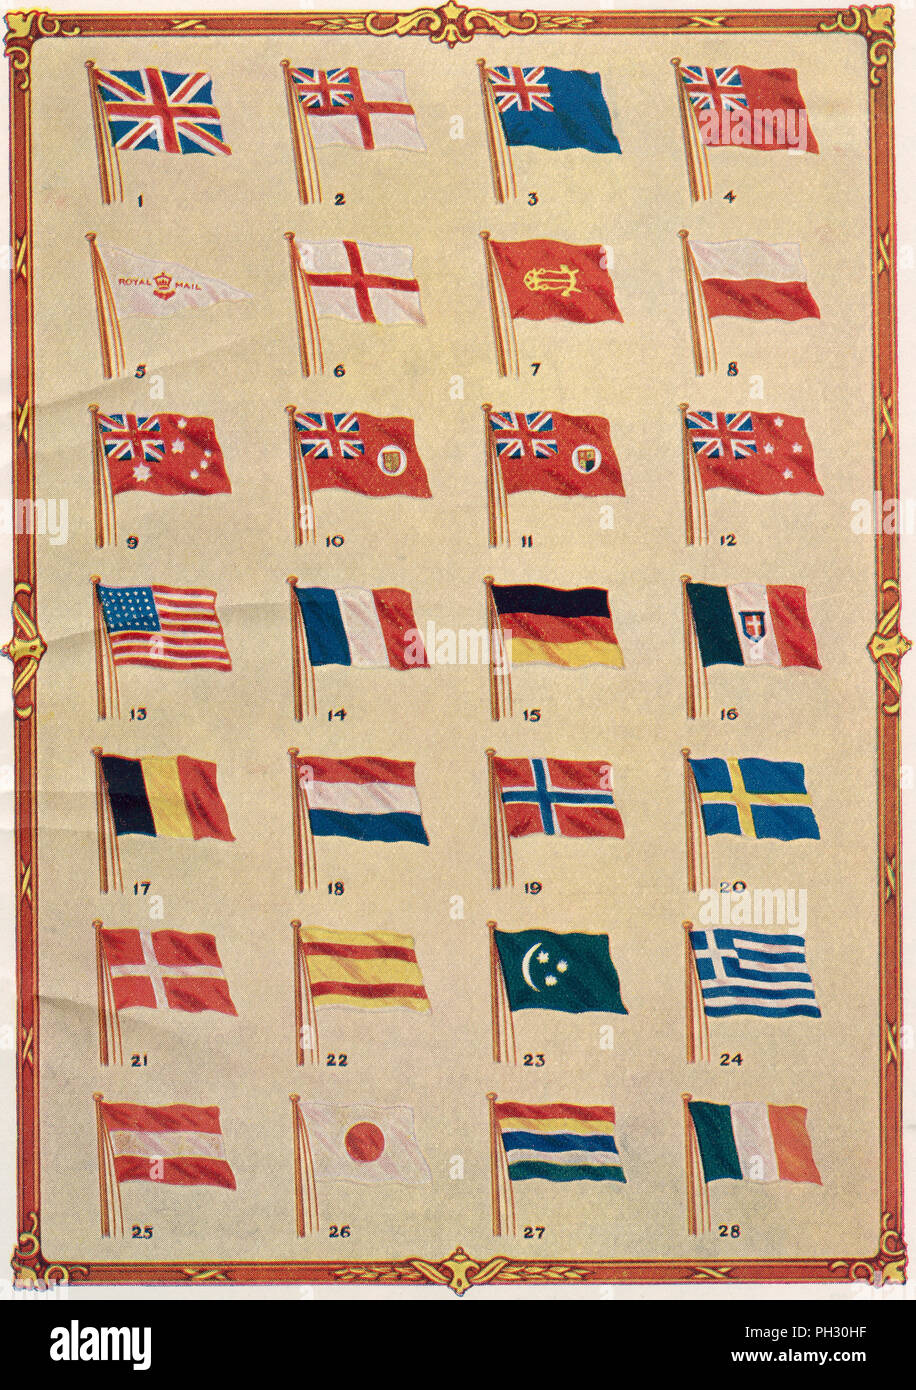 Ensigns and National Merchant Flags. 1. Union Jack 2. White Ensign (Royal  Navy) 3. Blue Ensign (Royal Navy Reserve) 4. Red Ensign (Mercantile Marine)  5. Royal Mail 6. St. George's Cross (flown